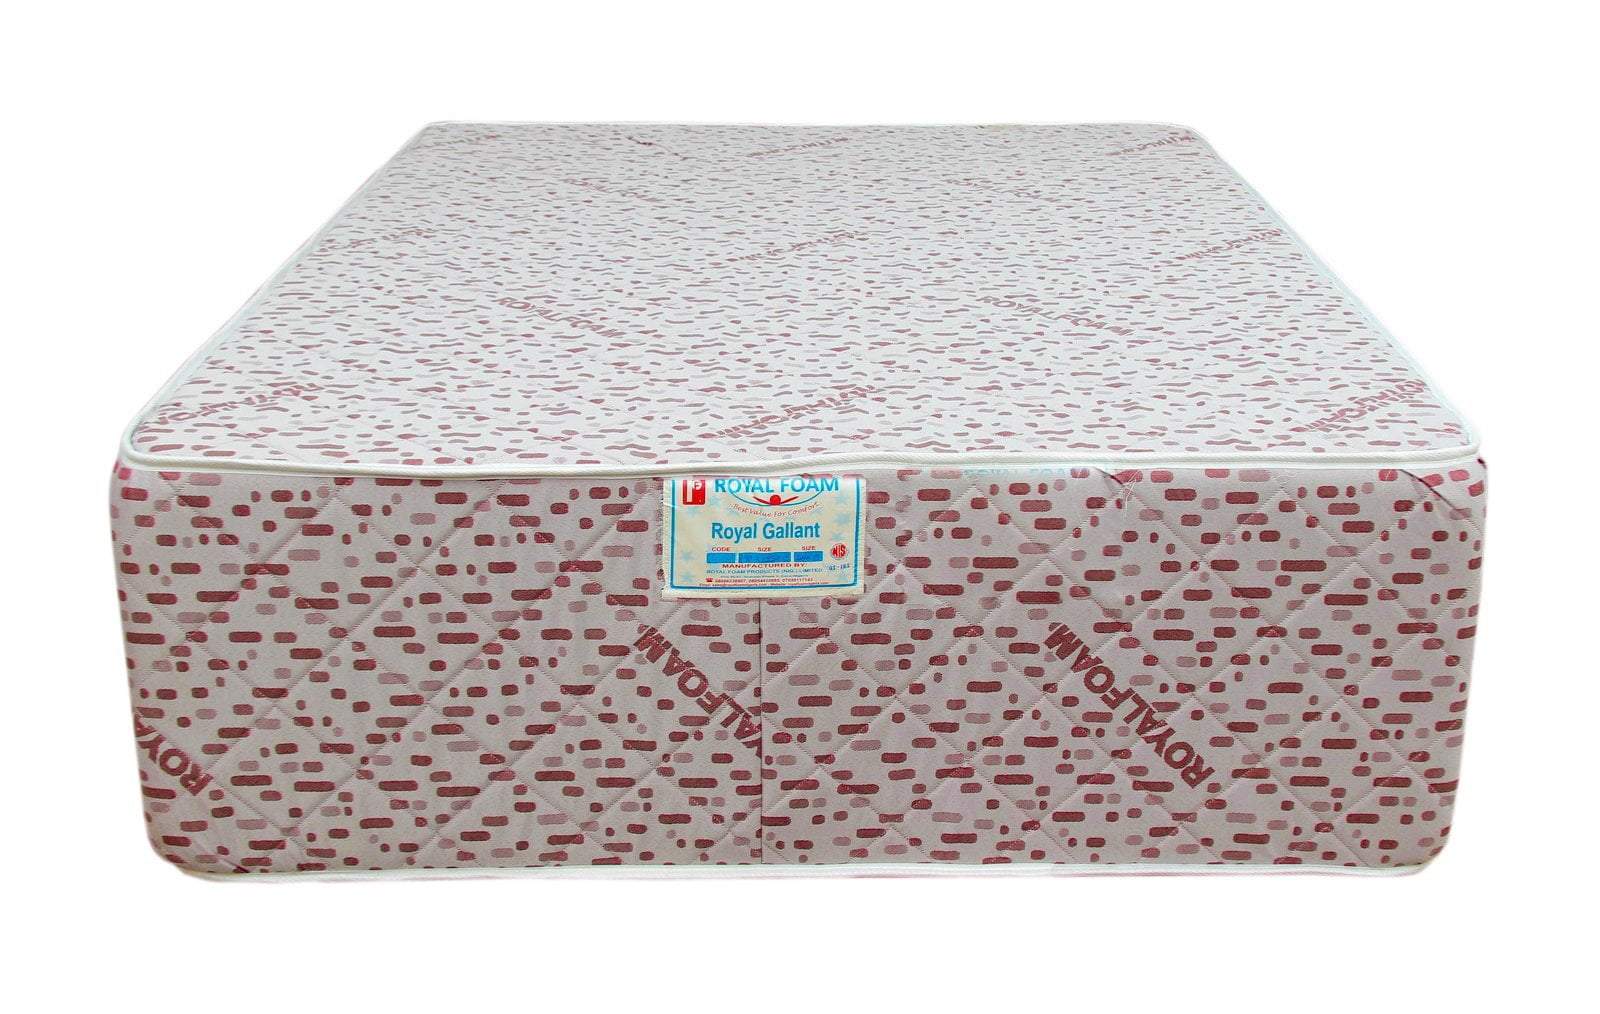 Royal Gallant JACQUARD fabric-Fully Quilted Mattress 190 X 120 X 30 CM(6ft x 4ft x 12inches) Single(Lagos Only)